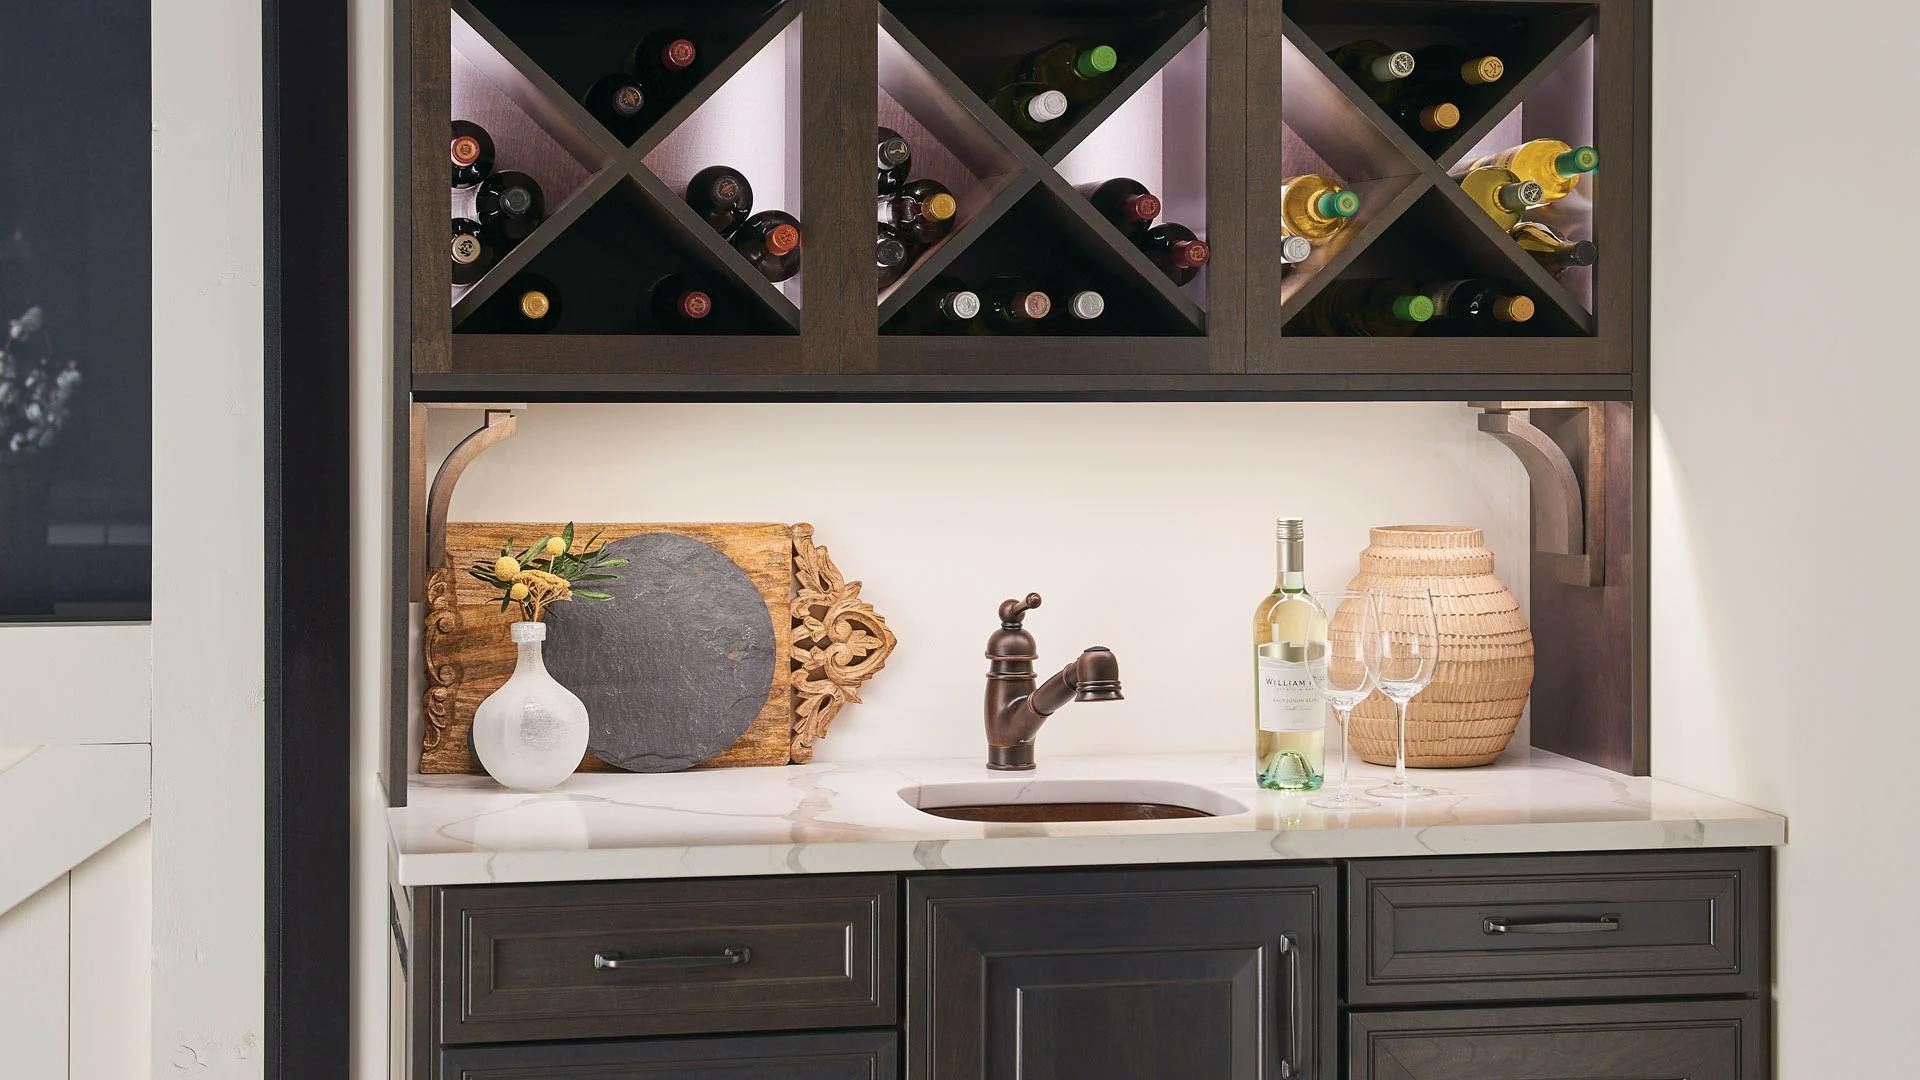 Close up on a cabinet holding multiple wine bottles with a built in sink featuring under cabinet lighting.